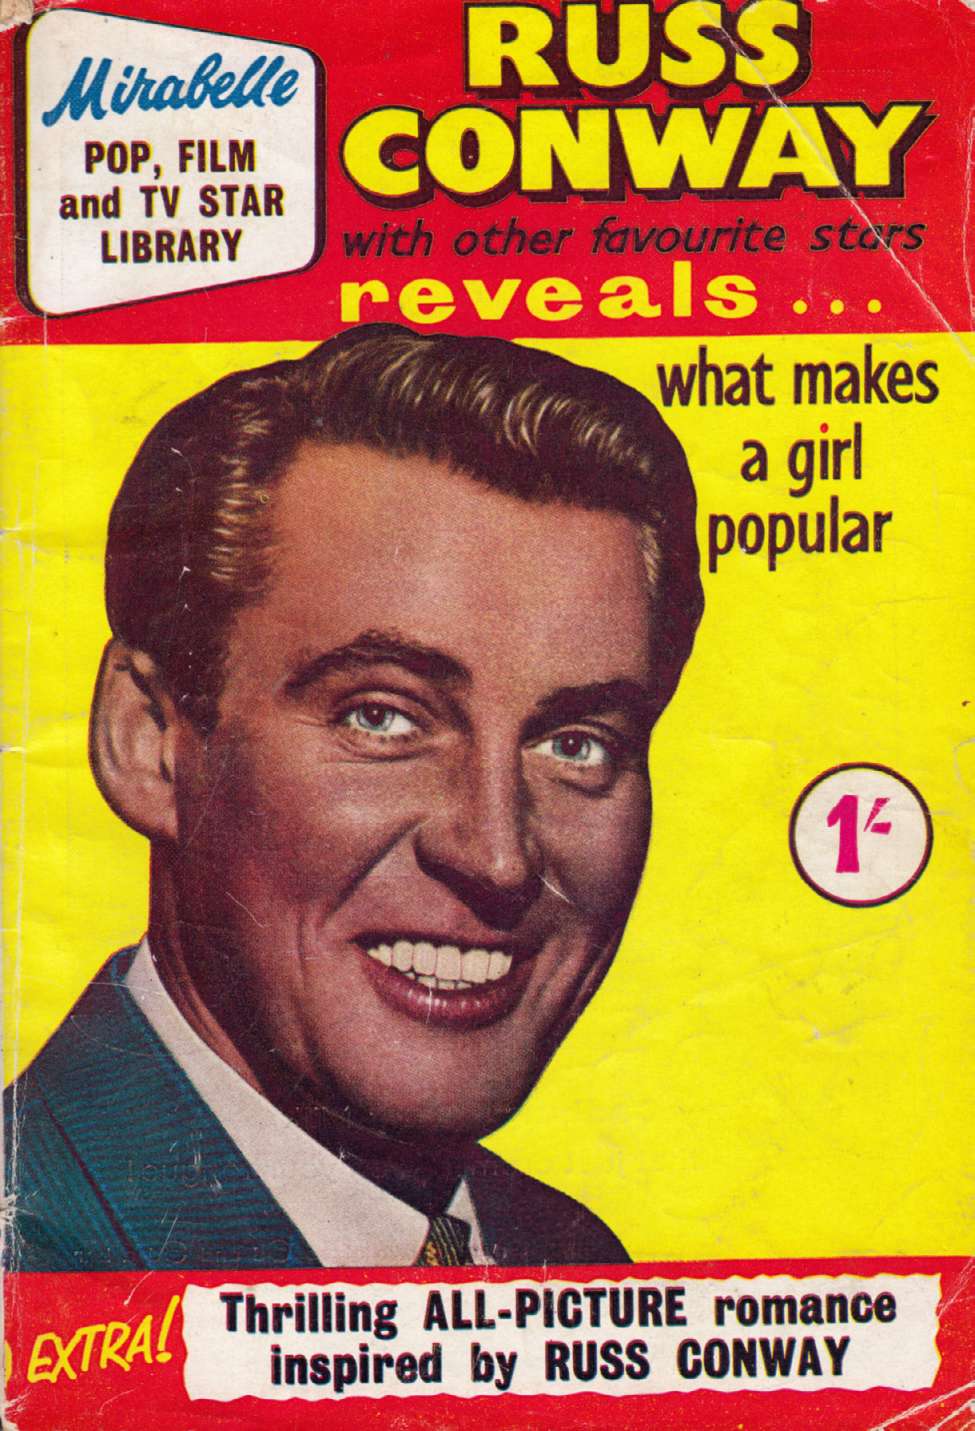 Book Cover For Mirabelle Pop, Film and TV Star Library